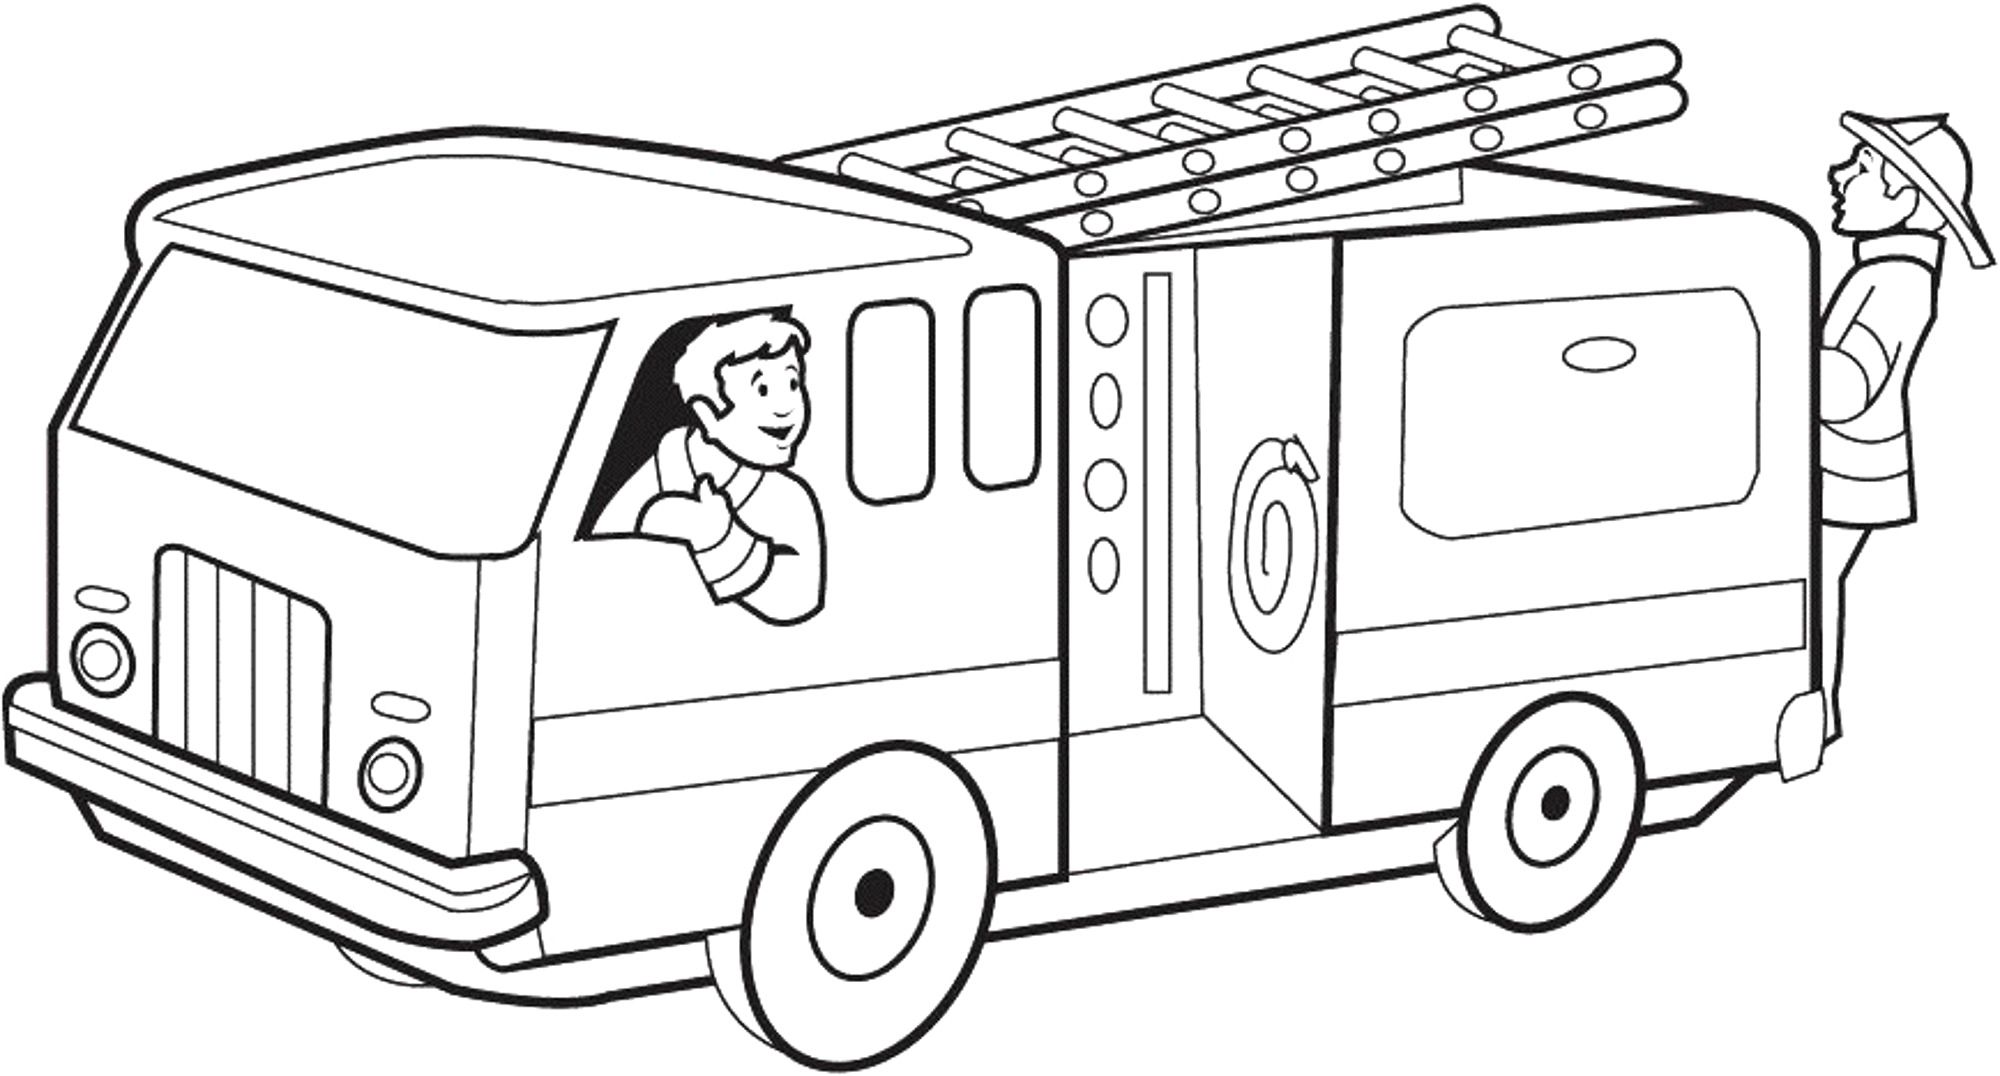 Image result for fire truck clipart black and white